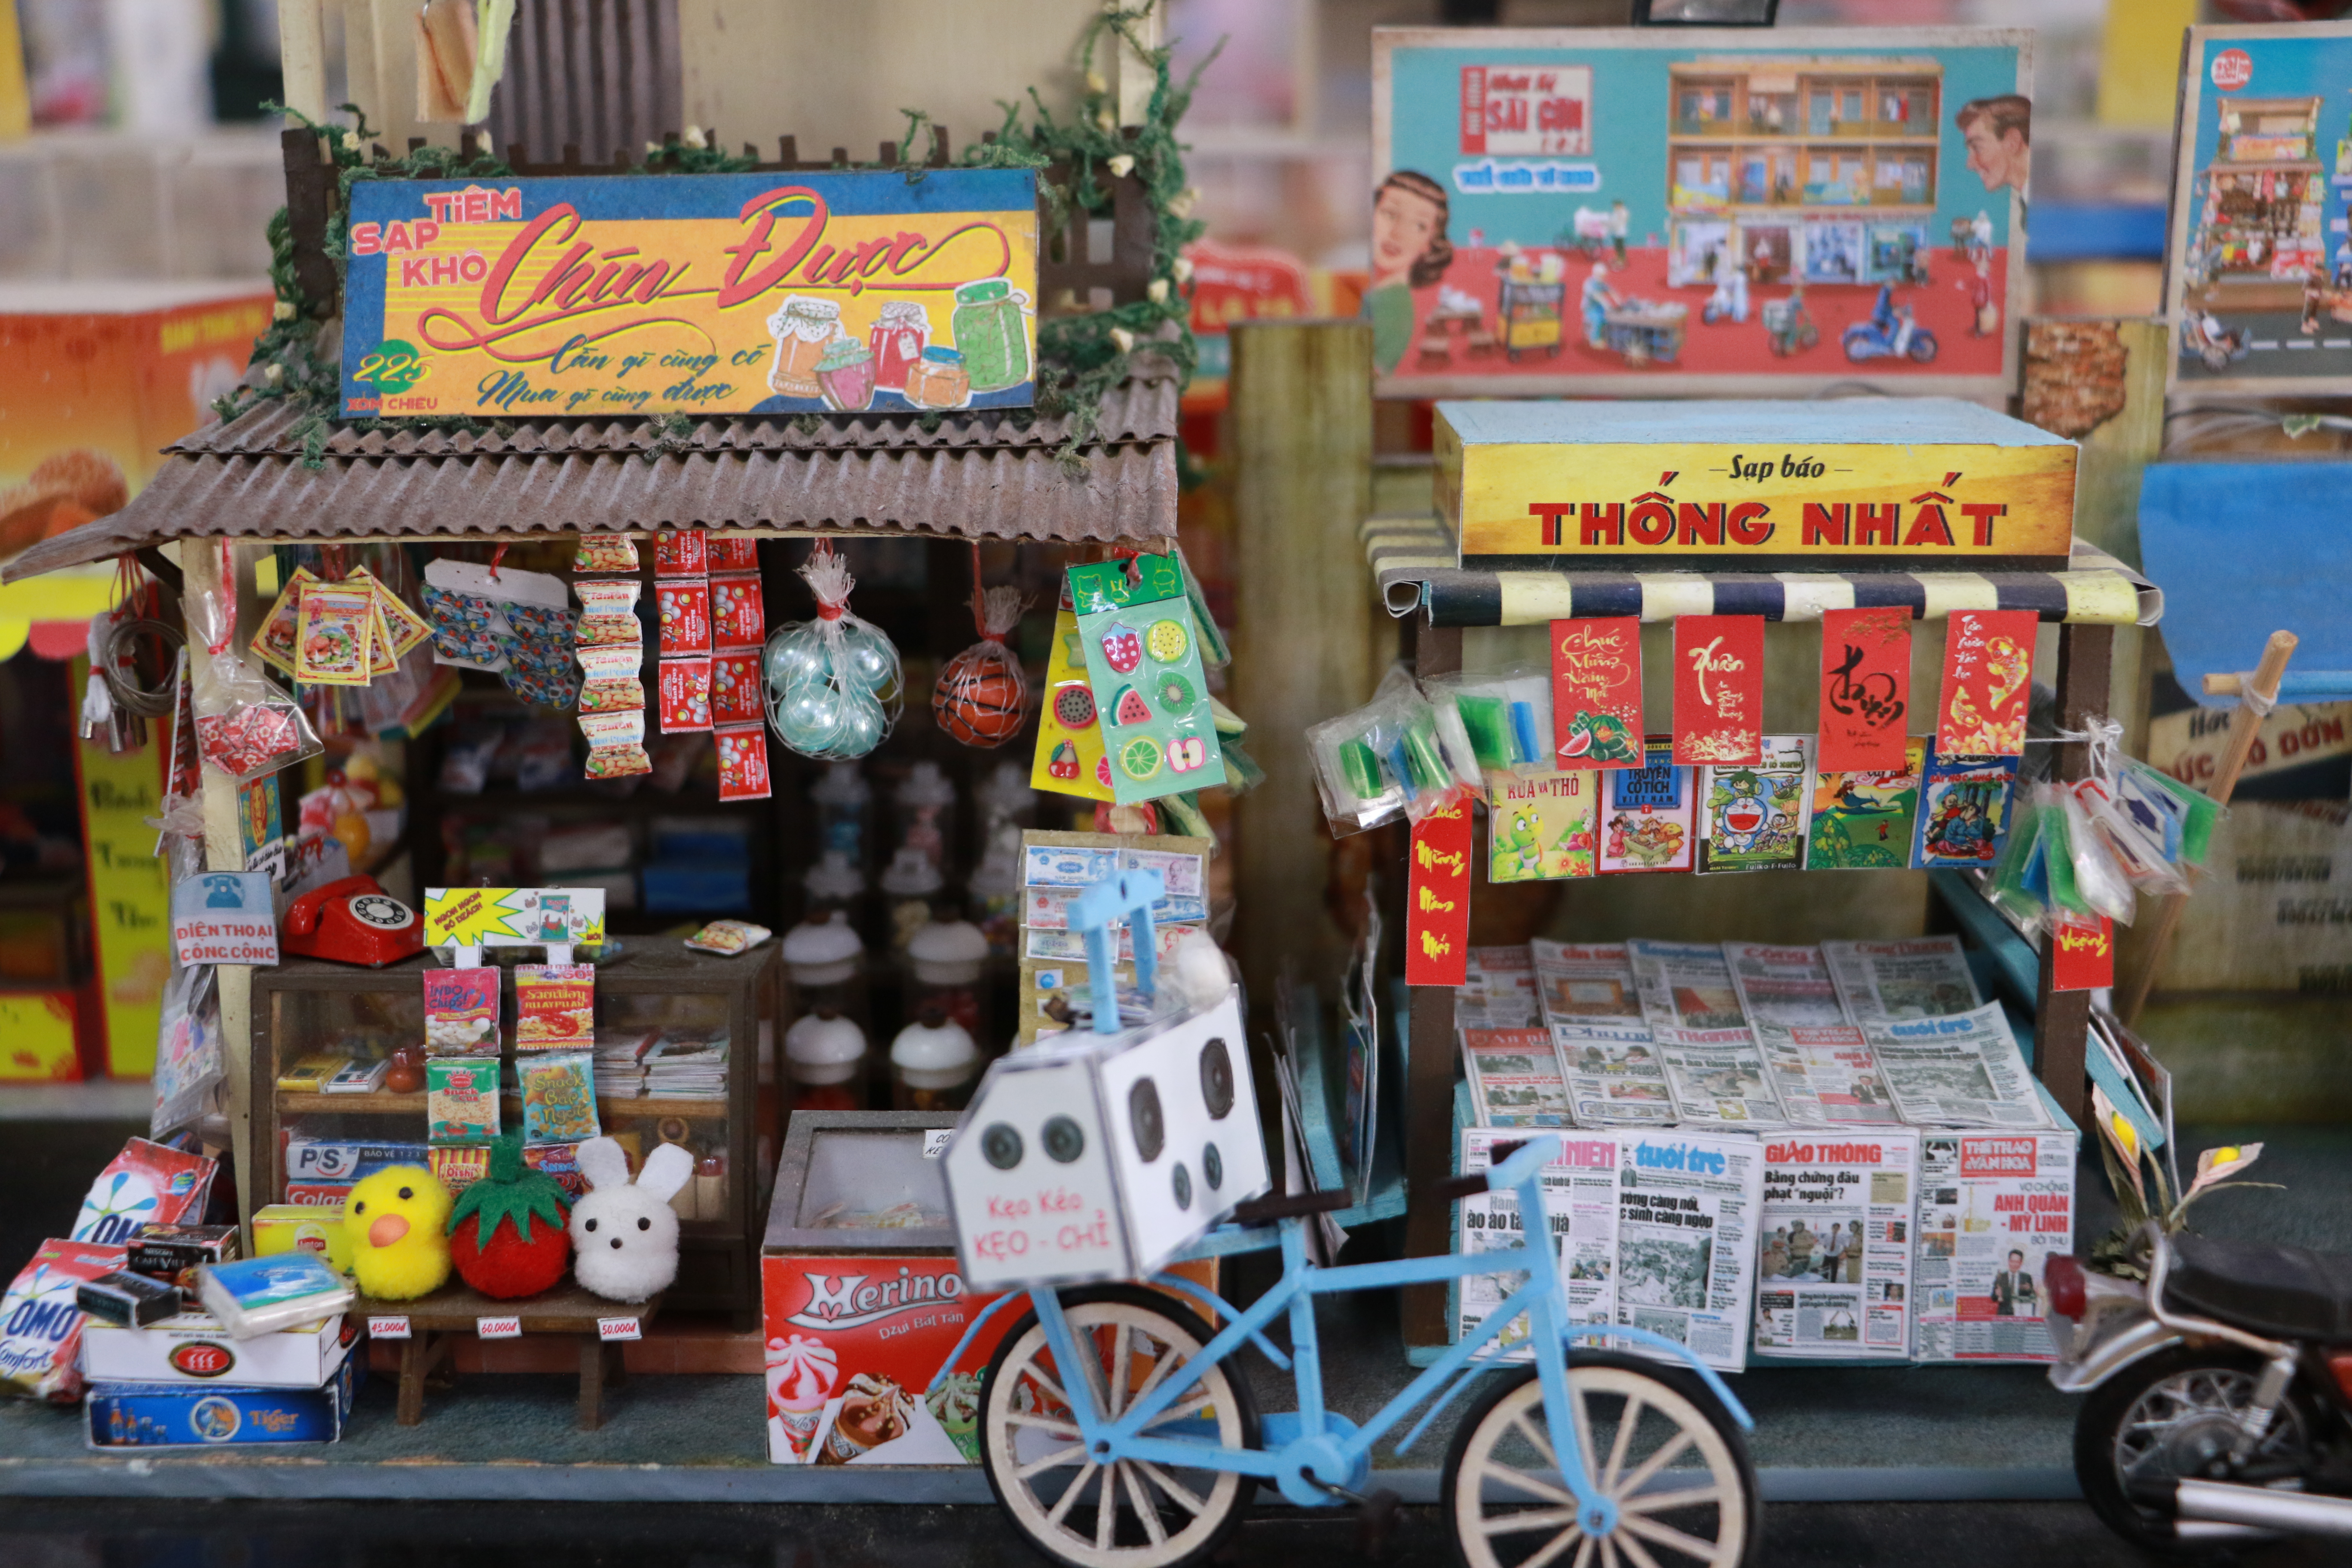 Miniatures by The Gioi Ti Hon  featuring stores selling groceries and newspapers in Saigon which was popular in the past. Photo: Binh Minh/ Tuoi Tre